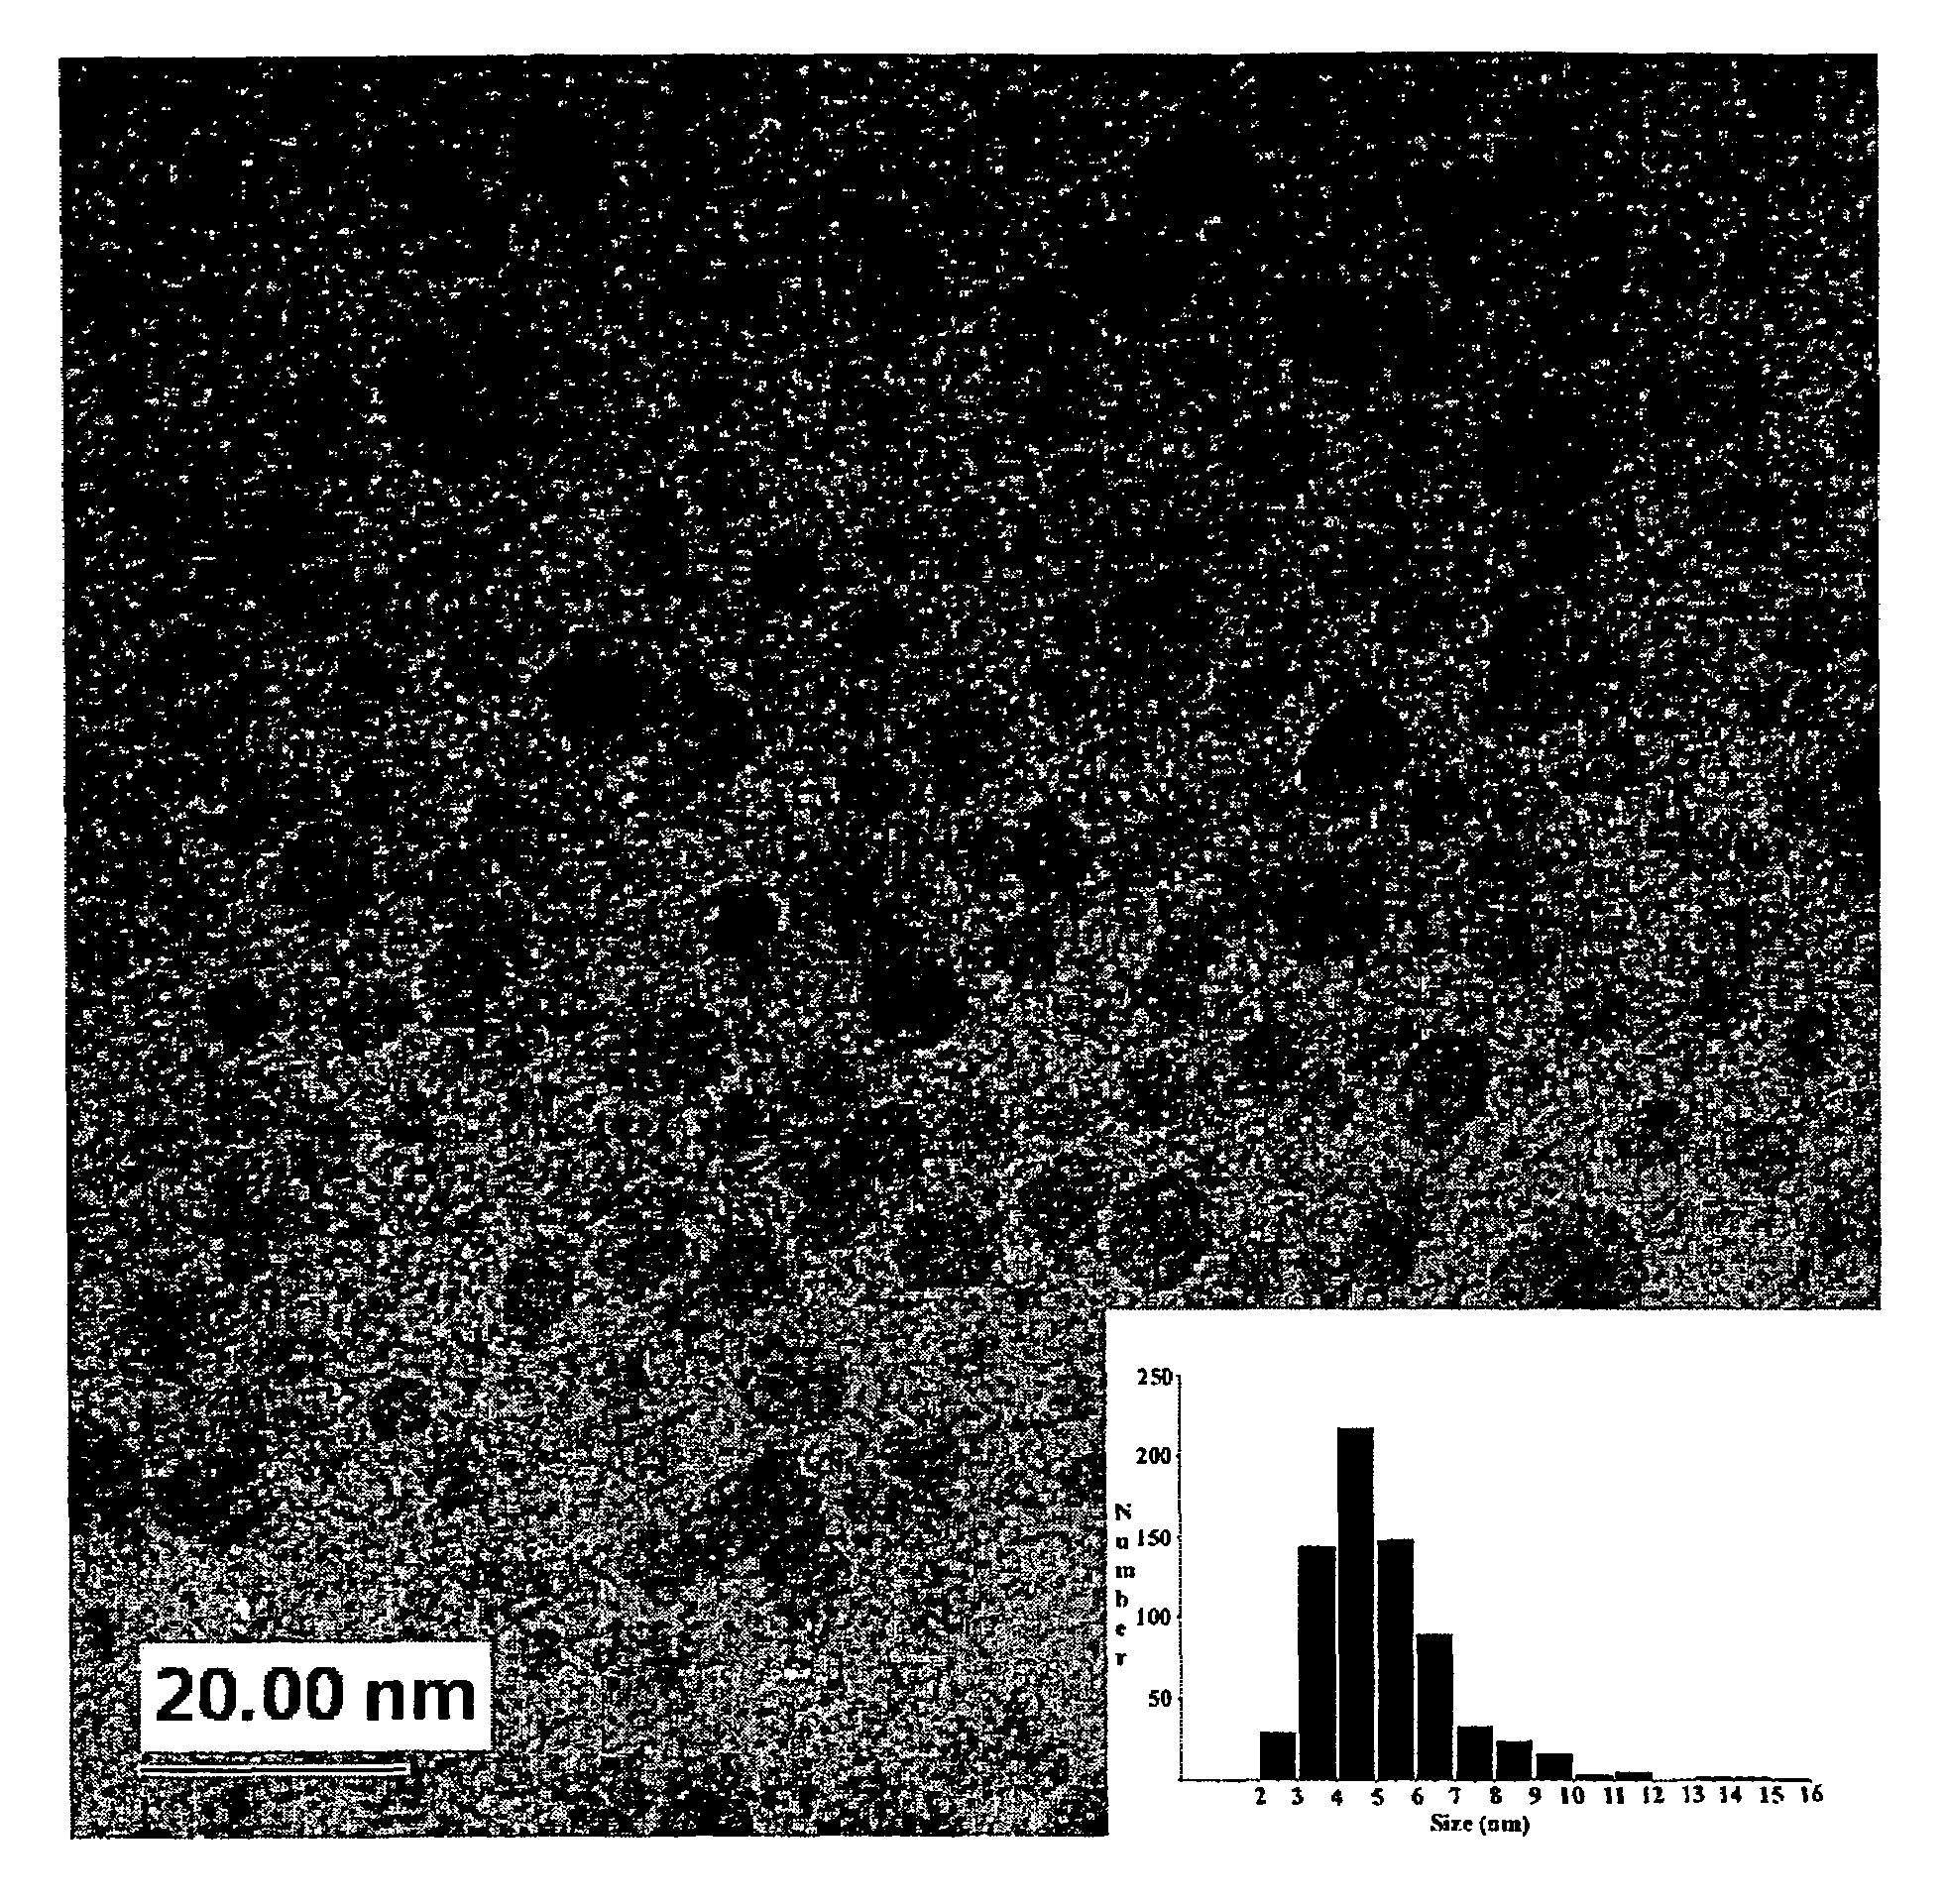 Method for preparing group IV nanocrystals with chemically accessible surfaces